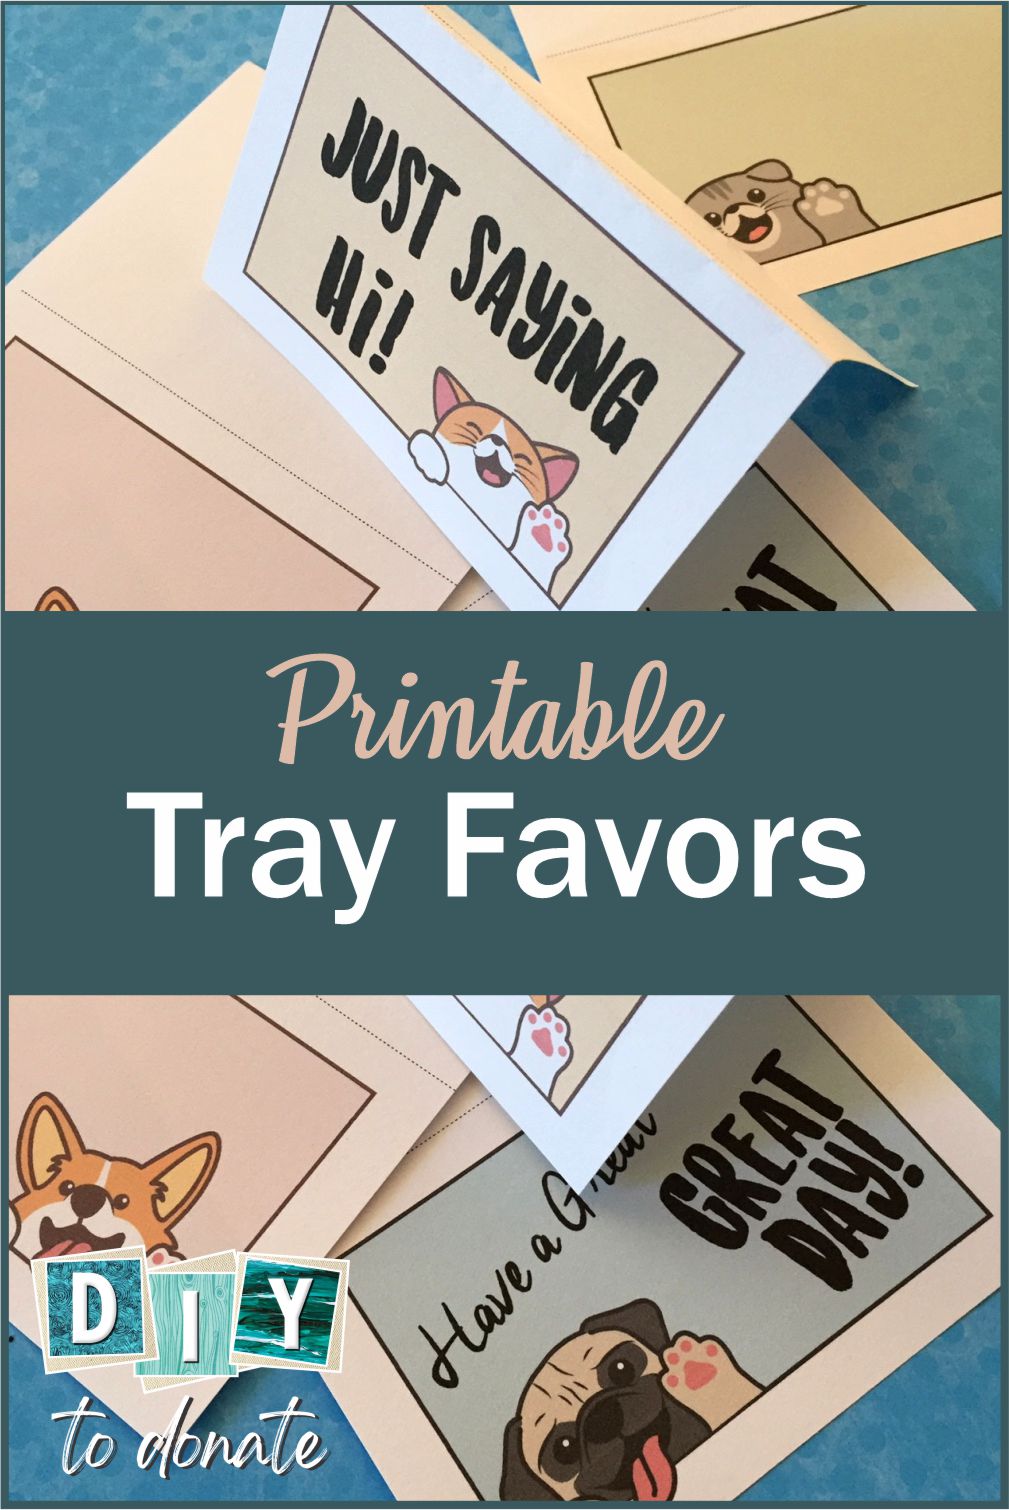 A small gesture like tray favors could be the highlight of of a senior's or a shut-in's day. Use our free printable and make as many as you want. #youthsquad #mfyouthsquad #trayfavors #favors #mealsonwheels #kidshelp #freeprintable #printables #seniors